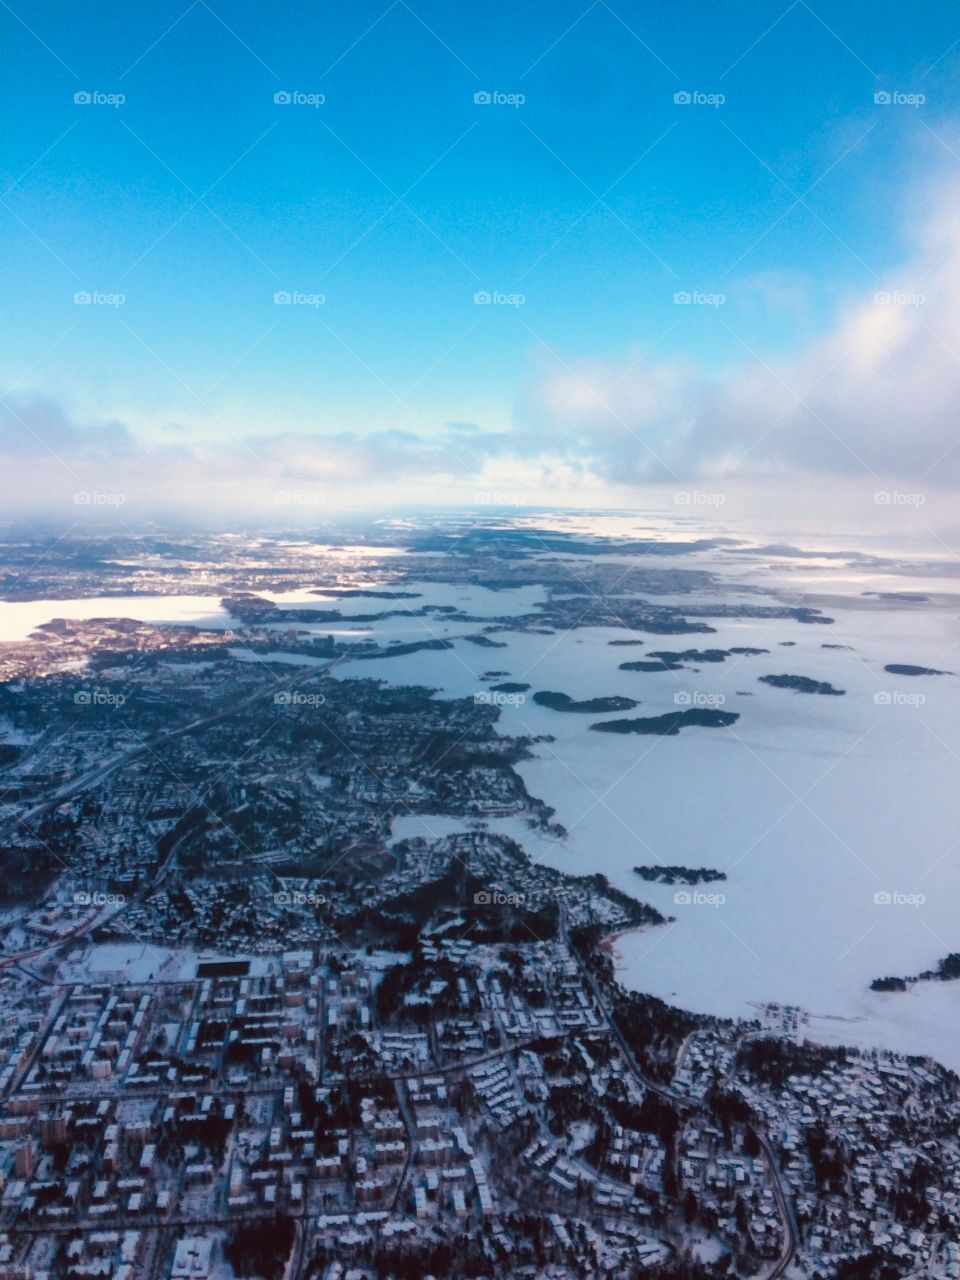 A view to the Finnish archipelago from an airplane on a sunny winter day